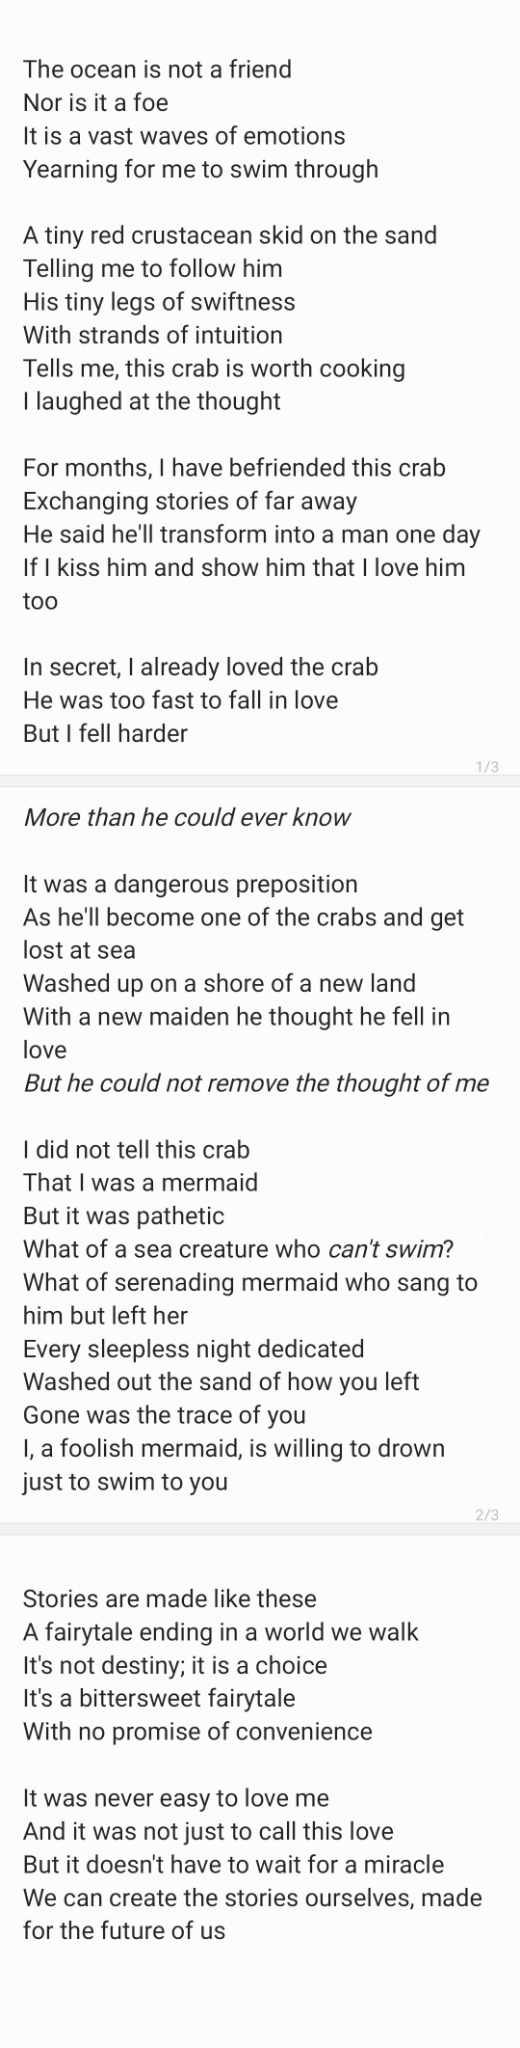 The Crab And The Maiden